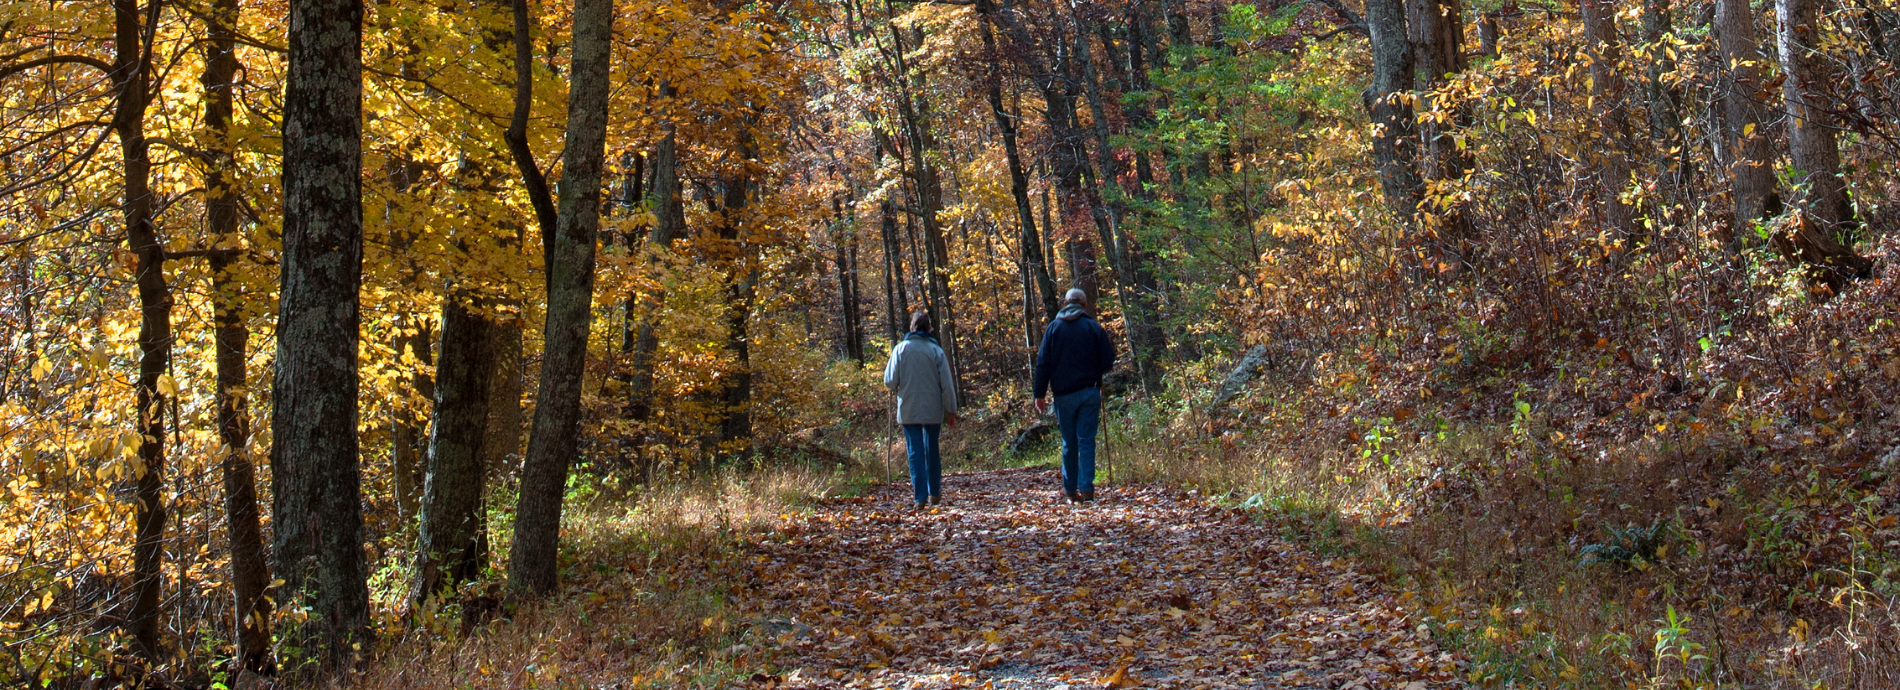 Two adults walking outdoors